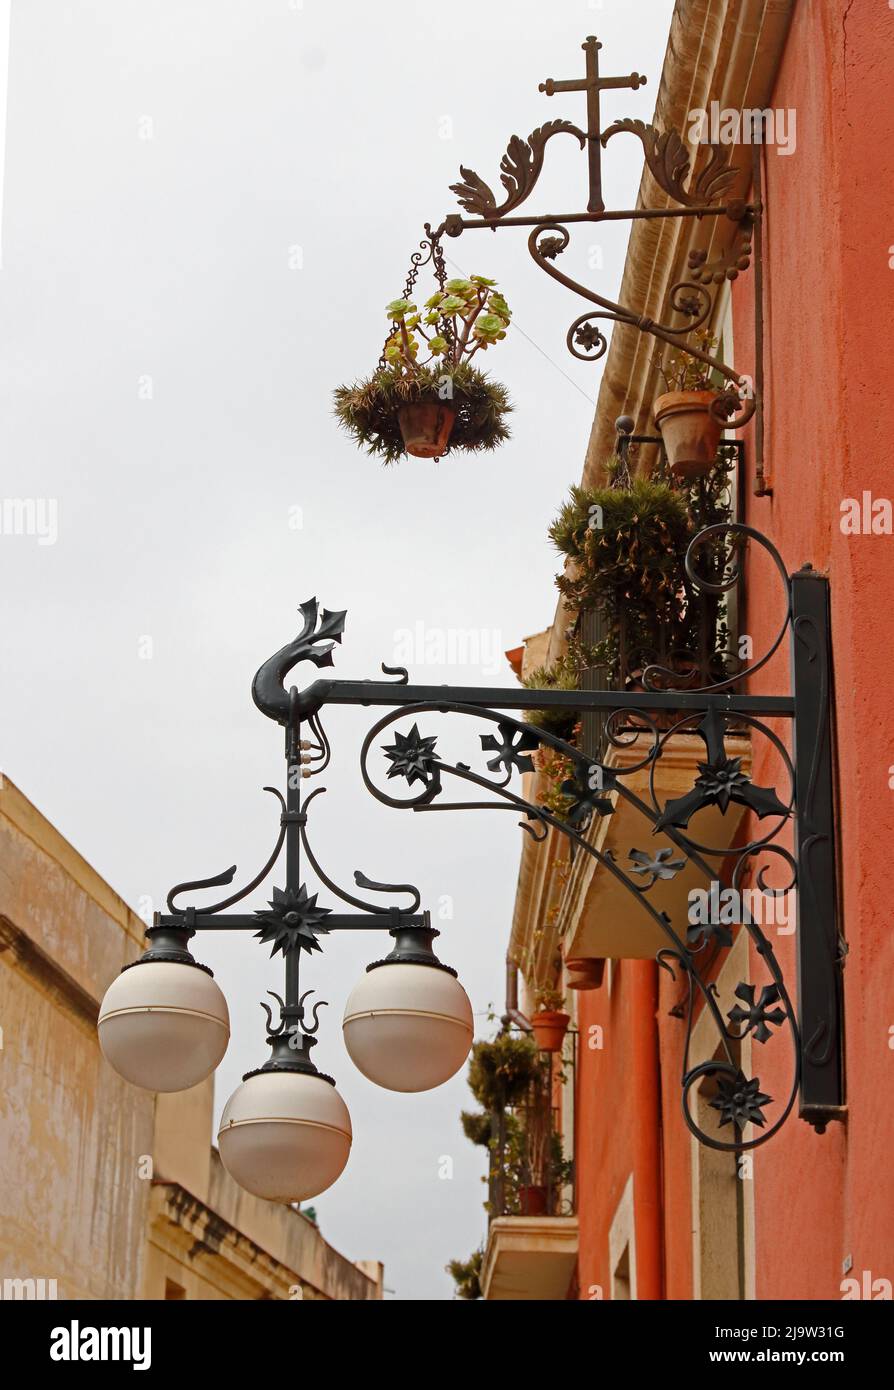 Lights and plantpots hanging from ornate metal wall brackets Stock Photo